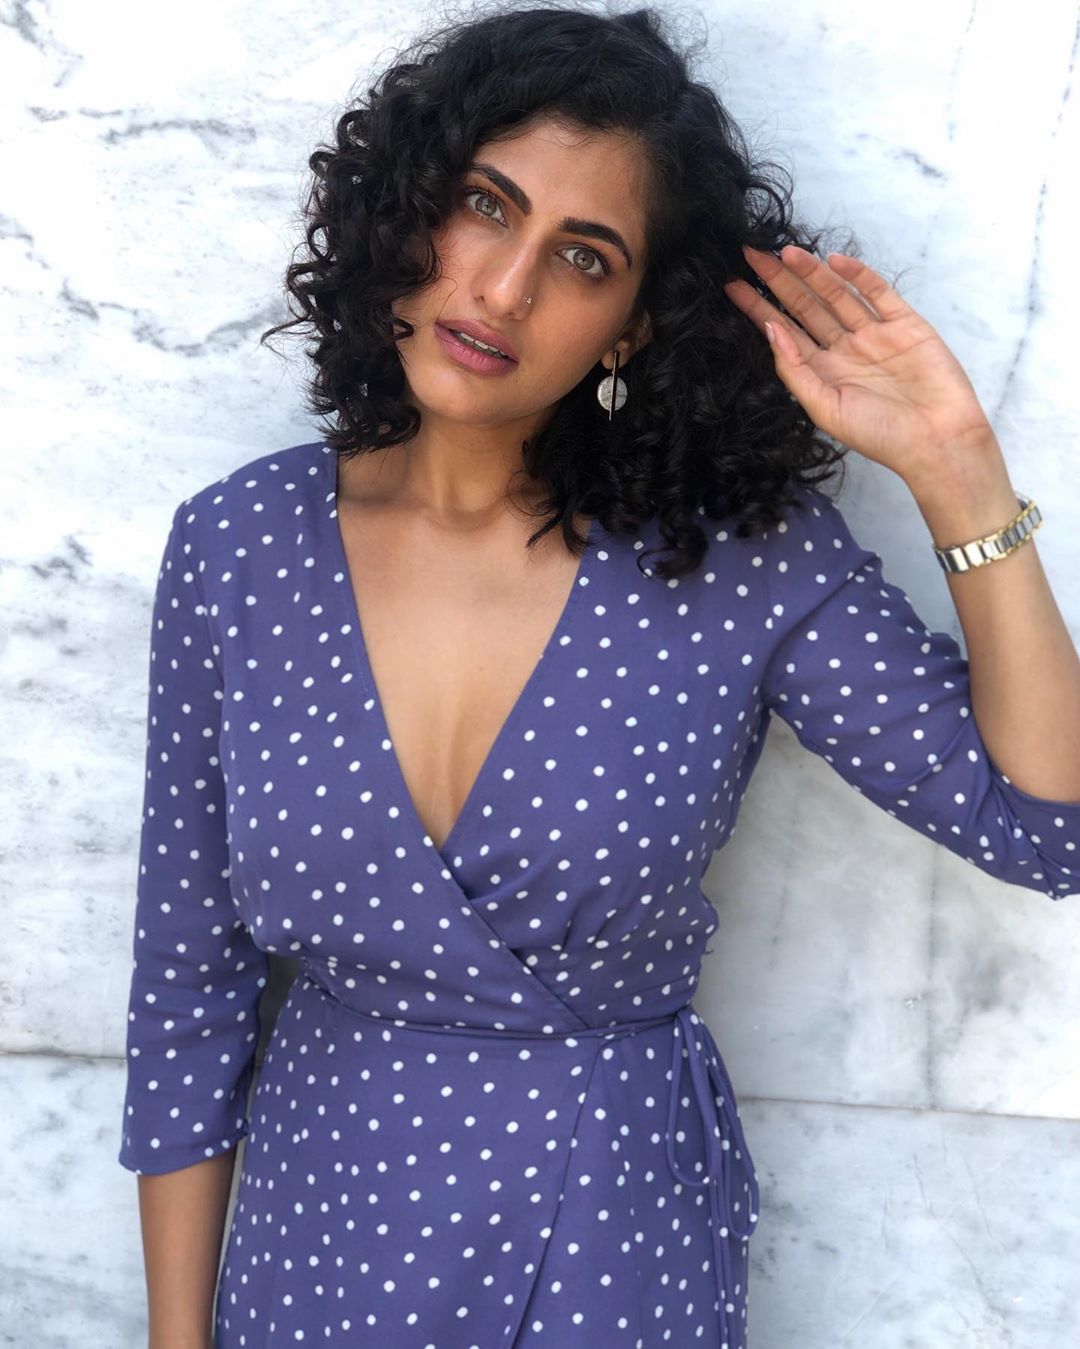 Pictures of Sacred Games' Kubbra Sait that set the temperatures soaring